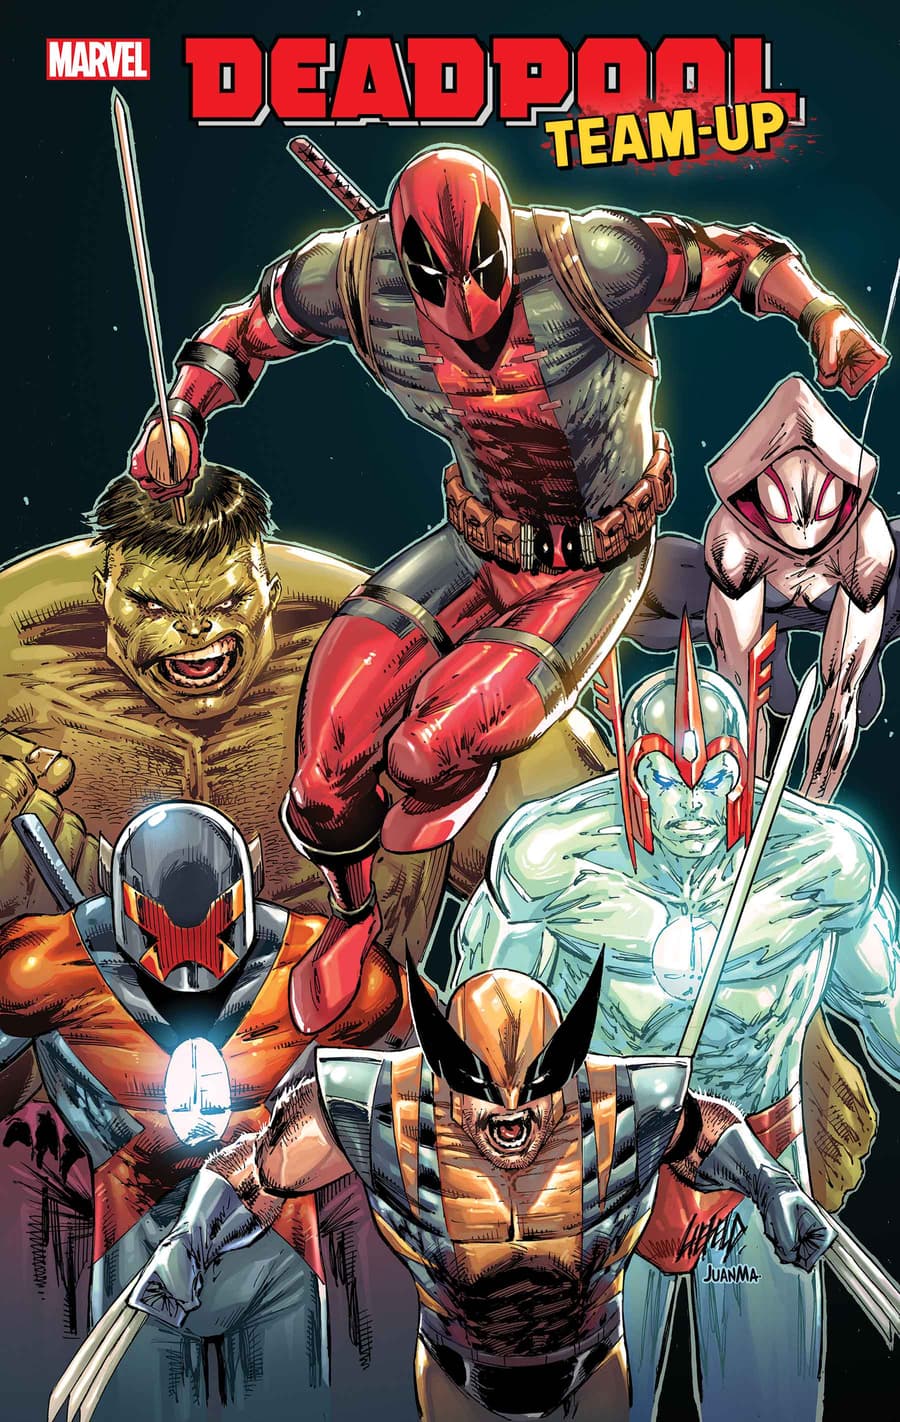 DEADPOOL TEAM-UP #1 cover by Rob Liefeld